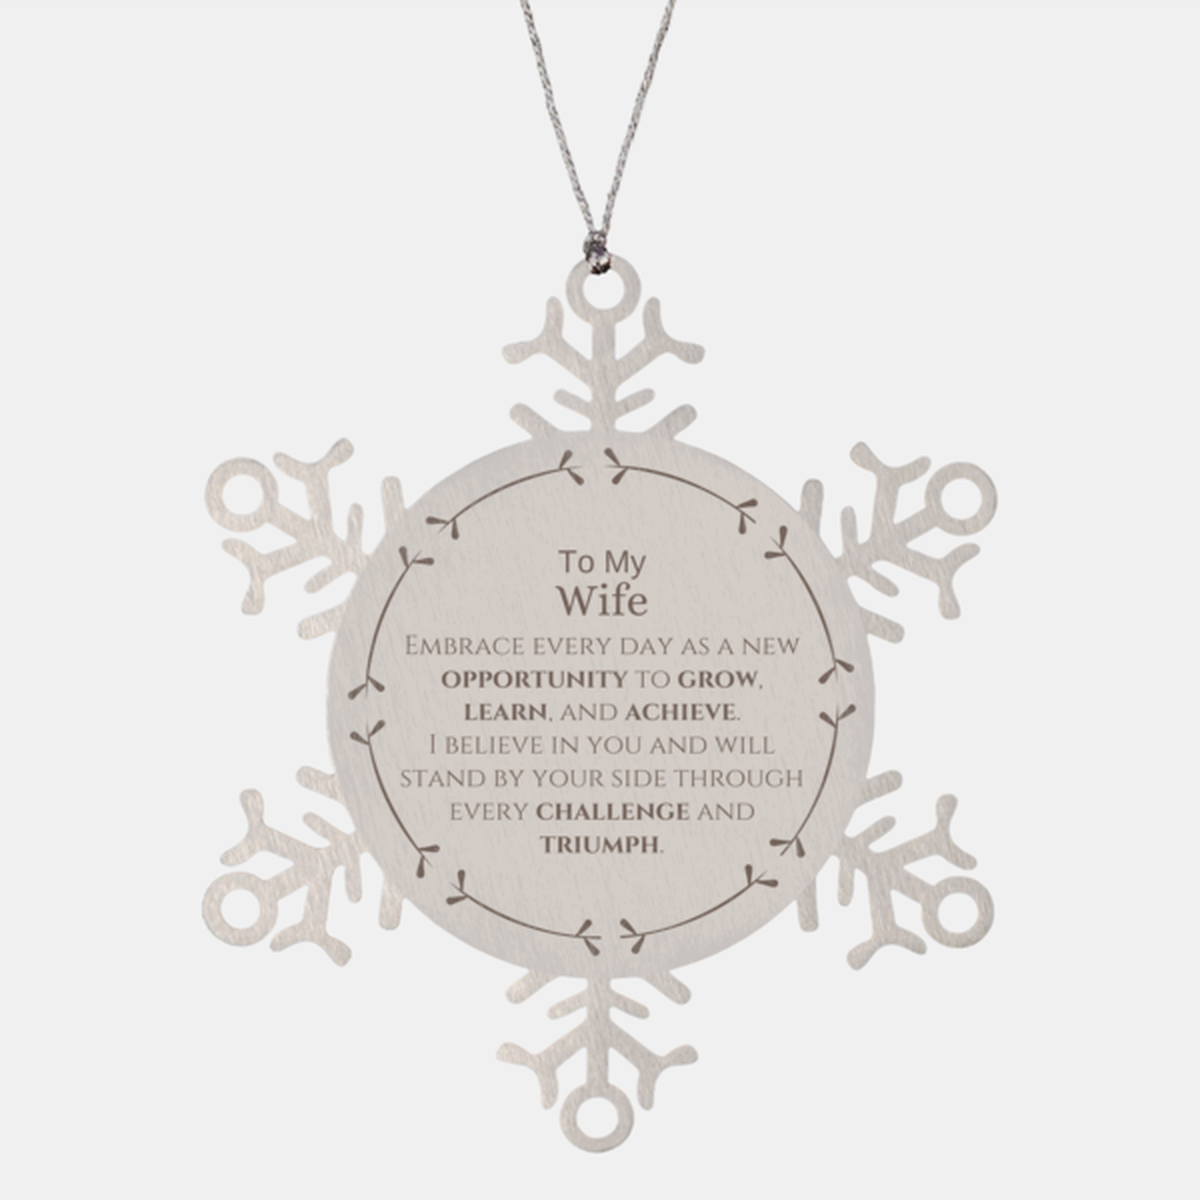 To My Wife Gifts, I believe in you and will stand by your side, Inspirational Snowflake Ornament For Wife, Birthday Christmas Motivational Wife Gifts